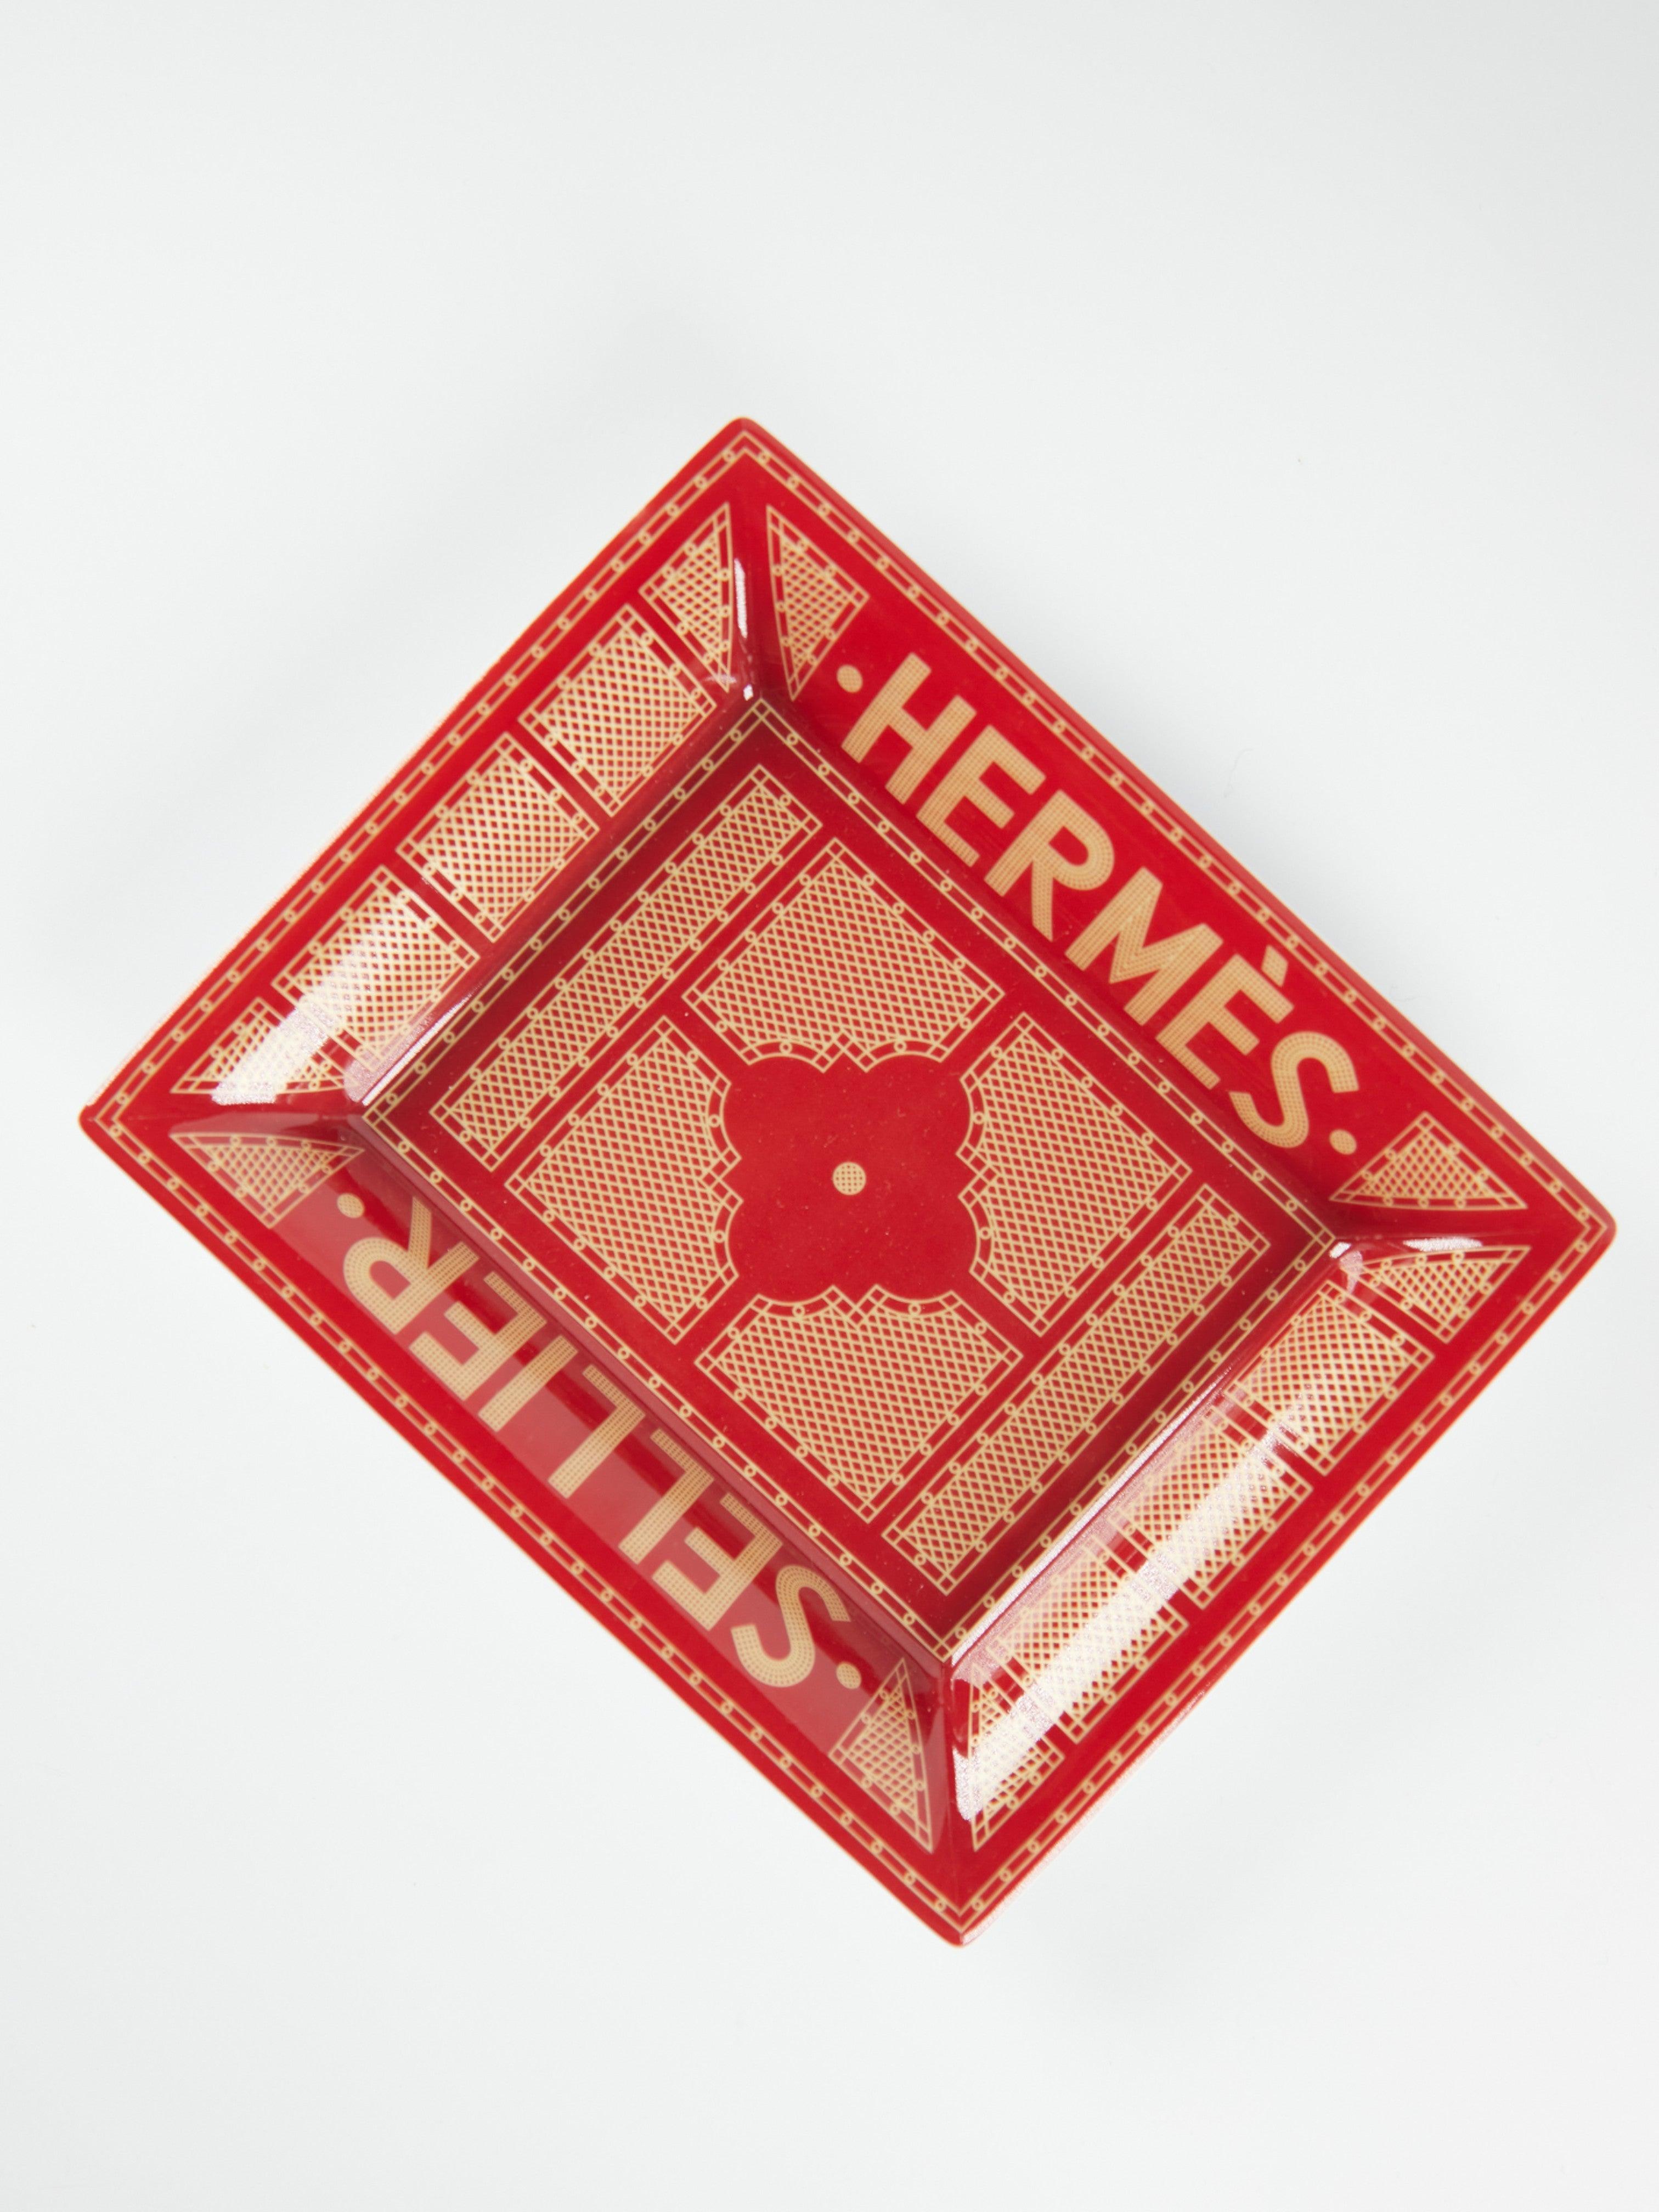 Hermès change tray in porcelain with velvet goatskin base

Rouge

Decorated using chromolithography

Made in France

Dimensions: L 16 x W 20 cm